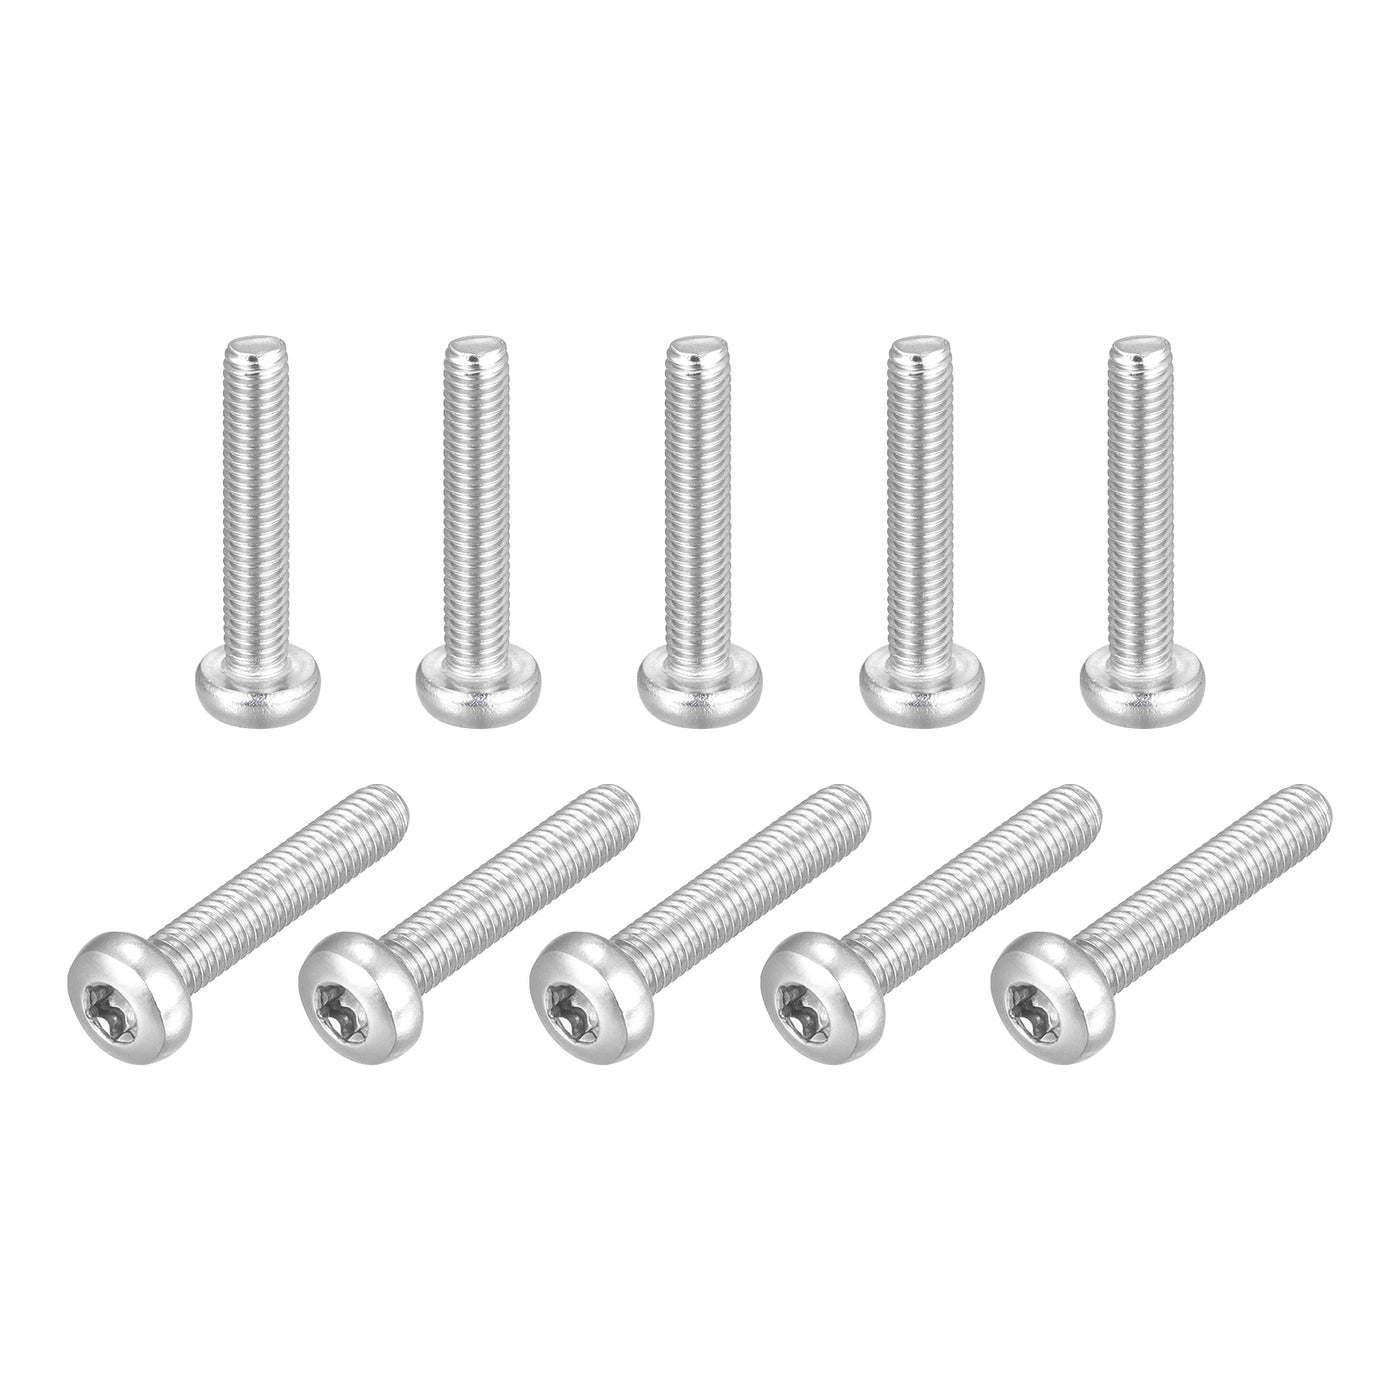 uxcell Uxcell M5x30mm Torx Security Machine Screws, 20pcs 316 Stainless Steel Pan Head Screw